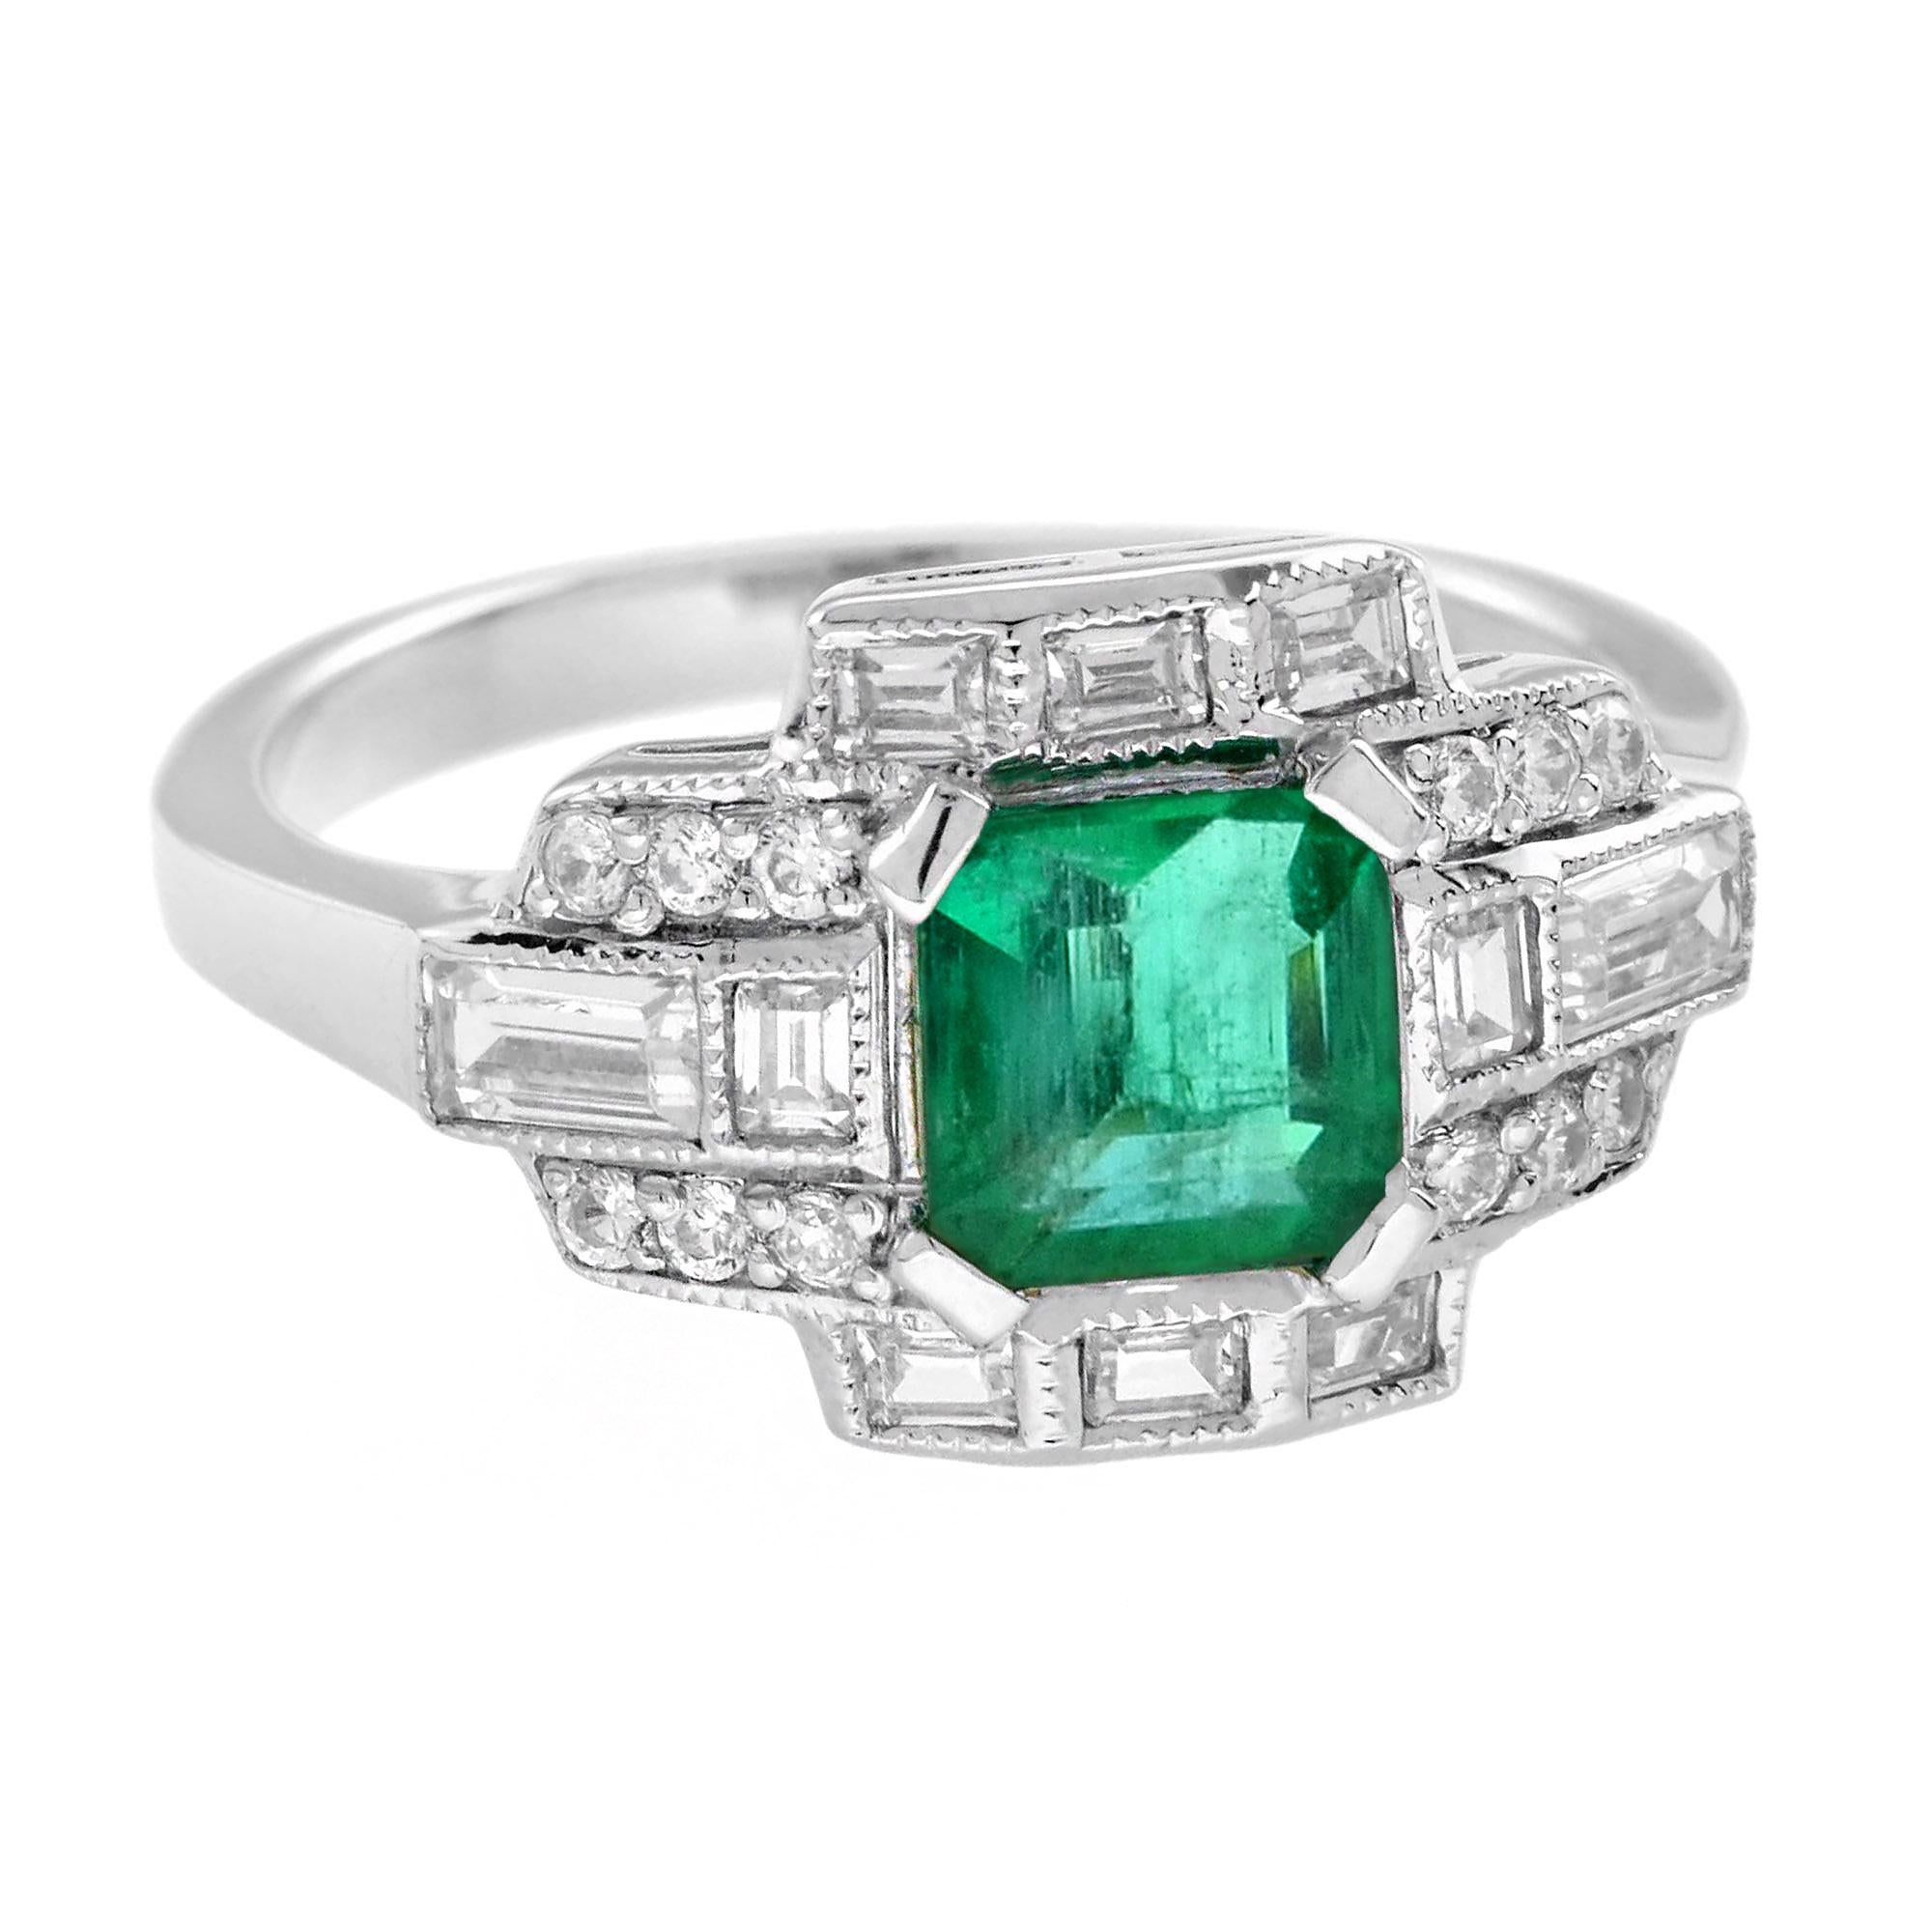 Asscher Cut 1.65 Ct. Emerald and Diamond Art Deco Style Engagement Ring in 18K White Gold For Sale